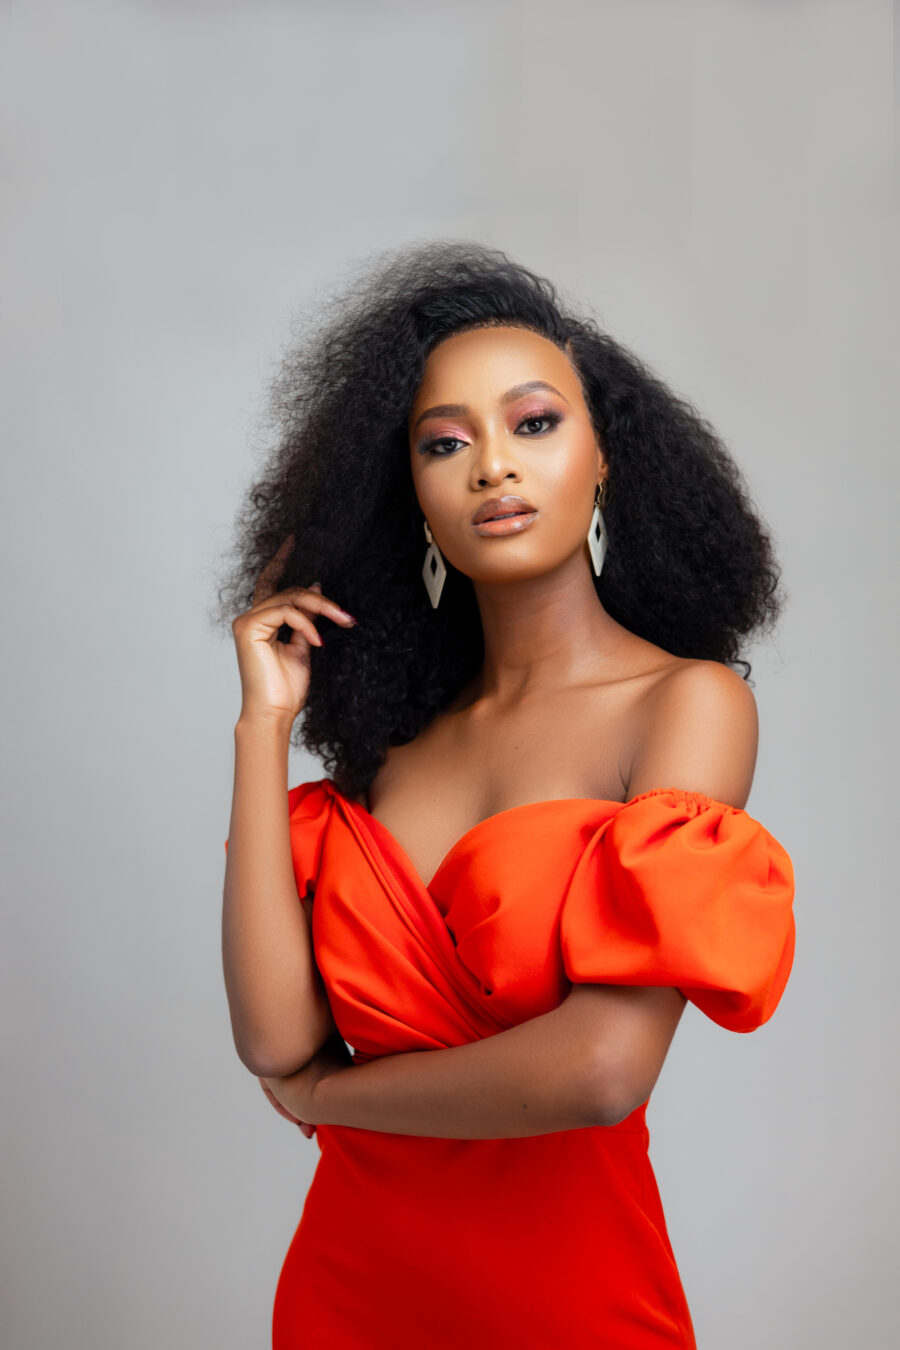 HELLO WEEKEND | Claude Mashego bringing her A-game to the Miss World pageant